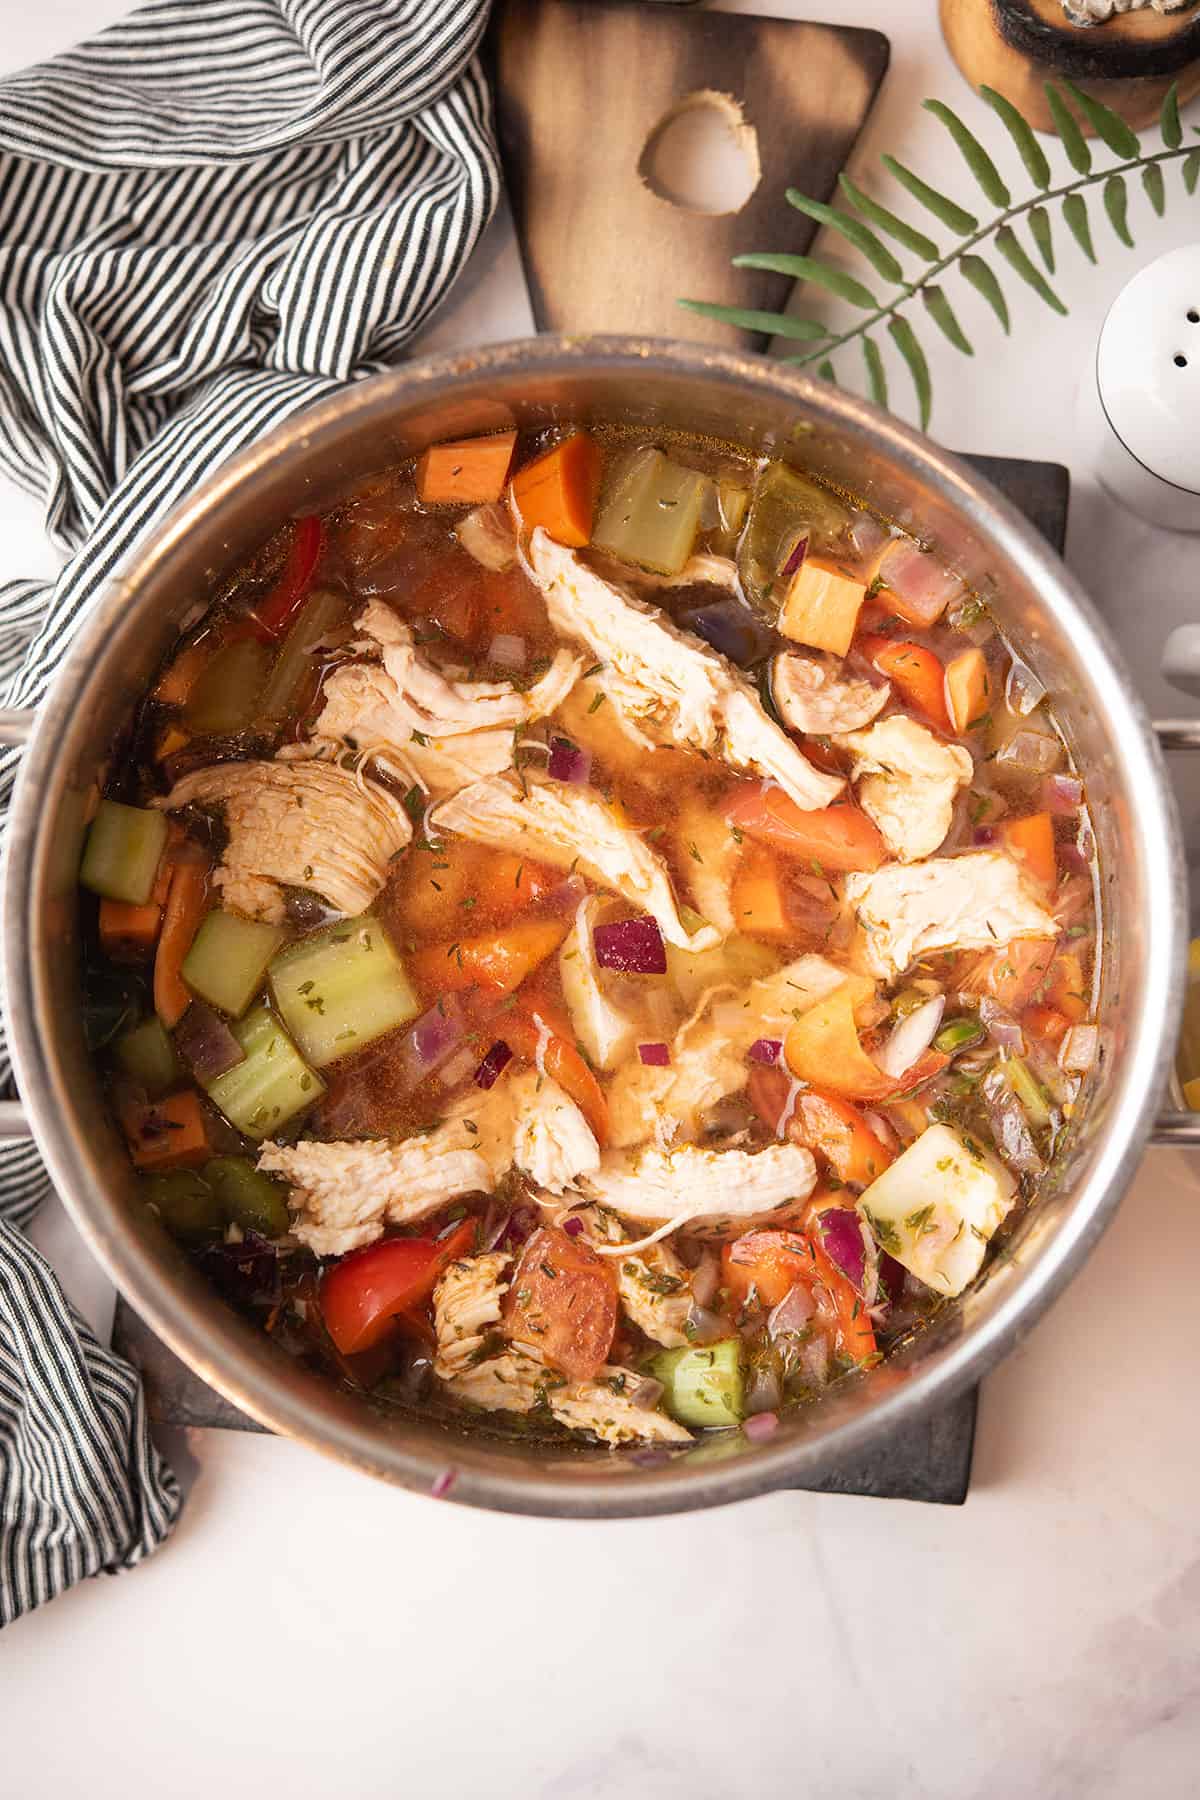 paprika chicken soup with vegetables and shredded chicken is ready to enjoy